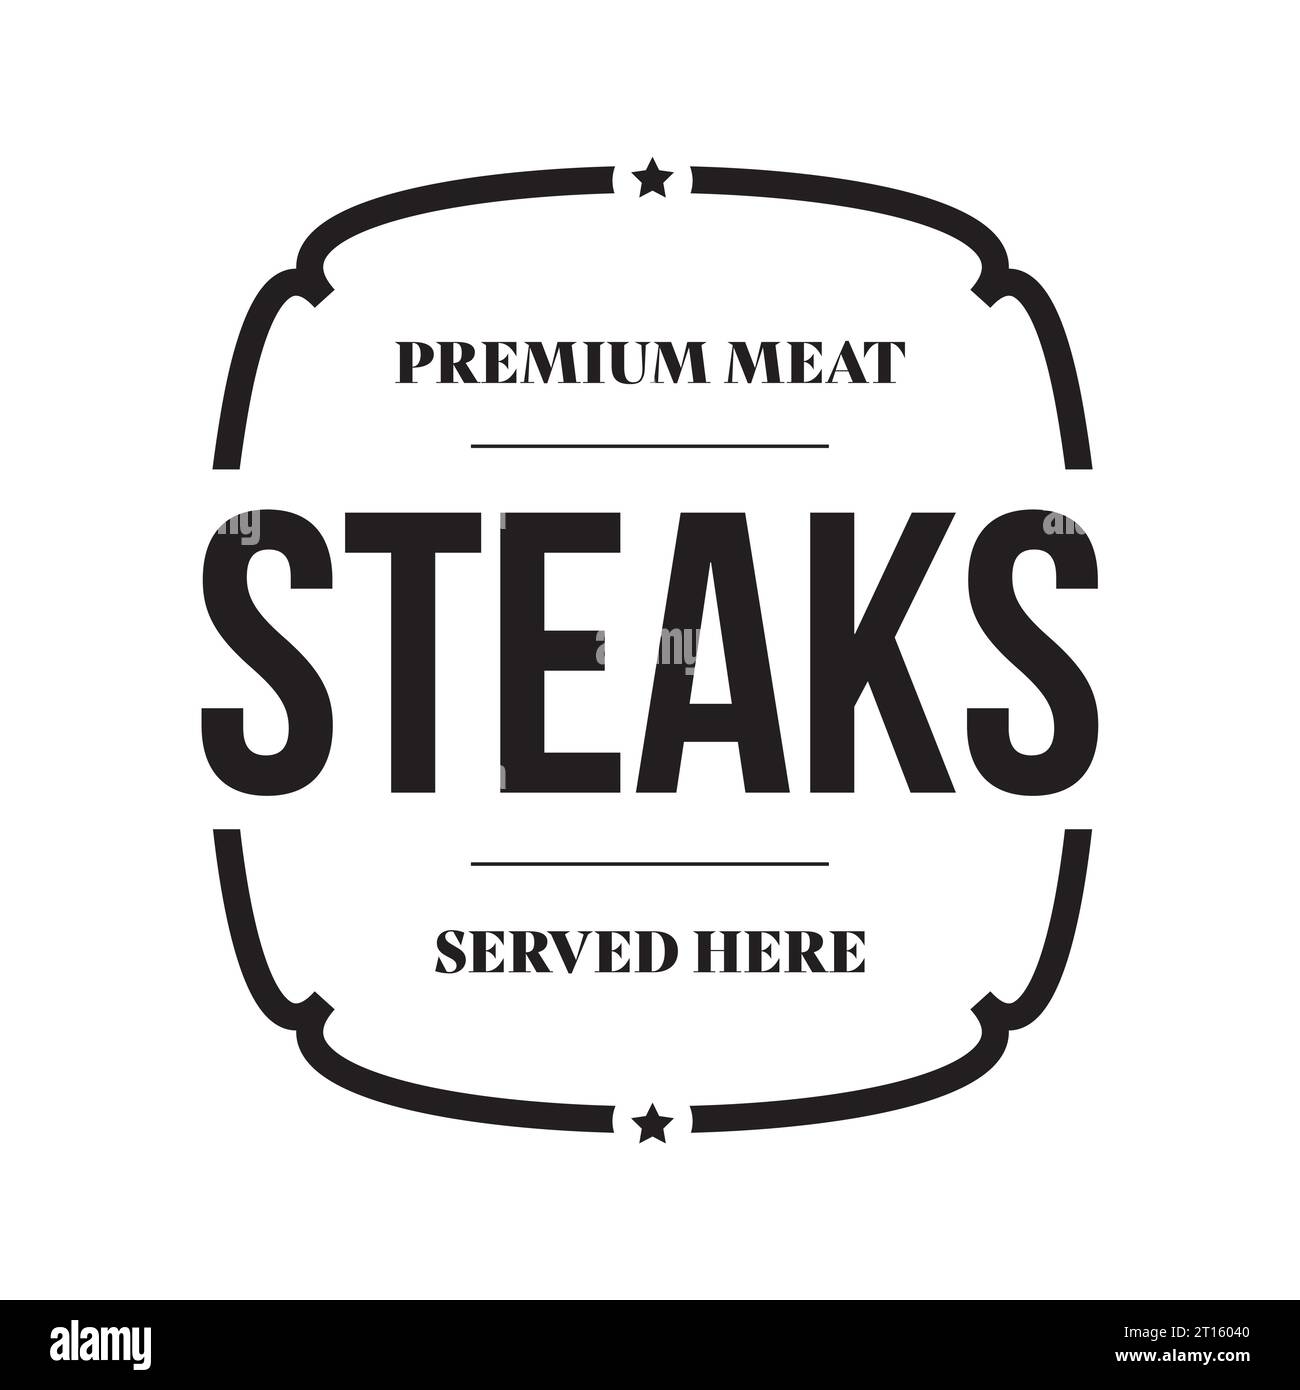 Pemium meat Steaks served here label Stock Vector